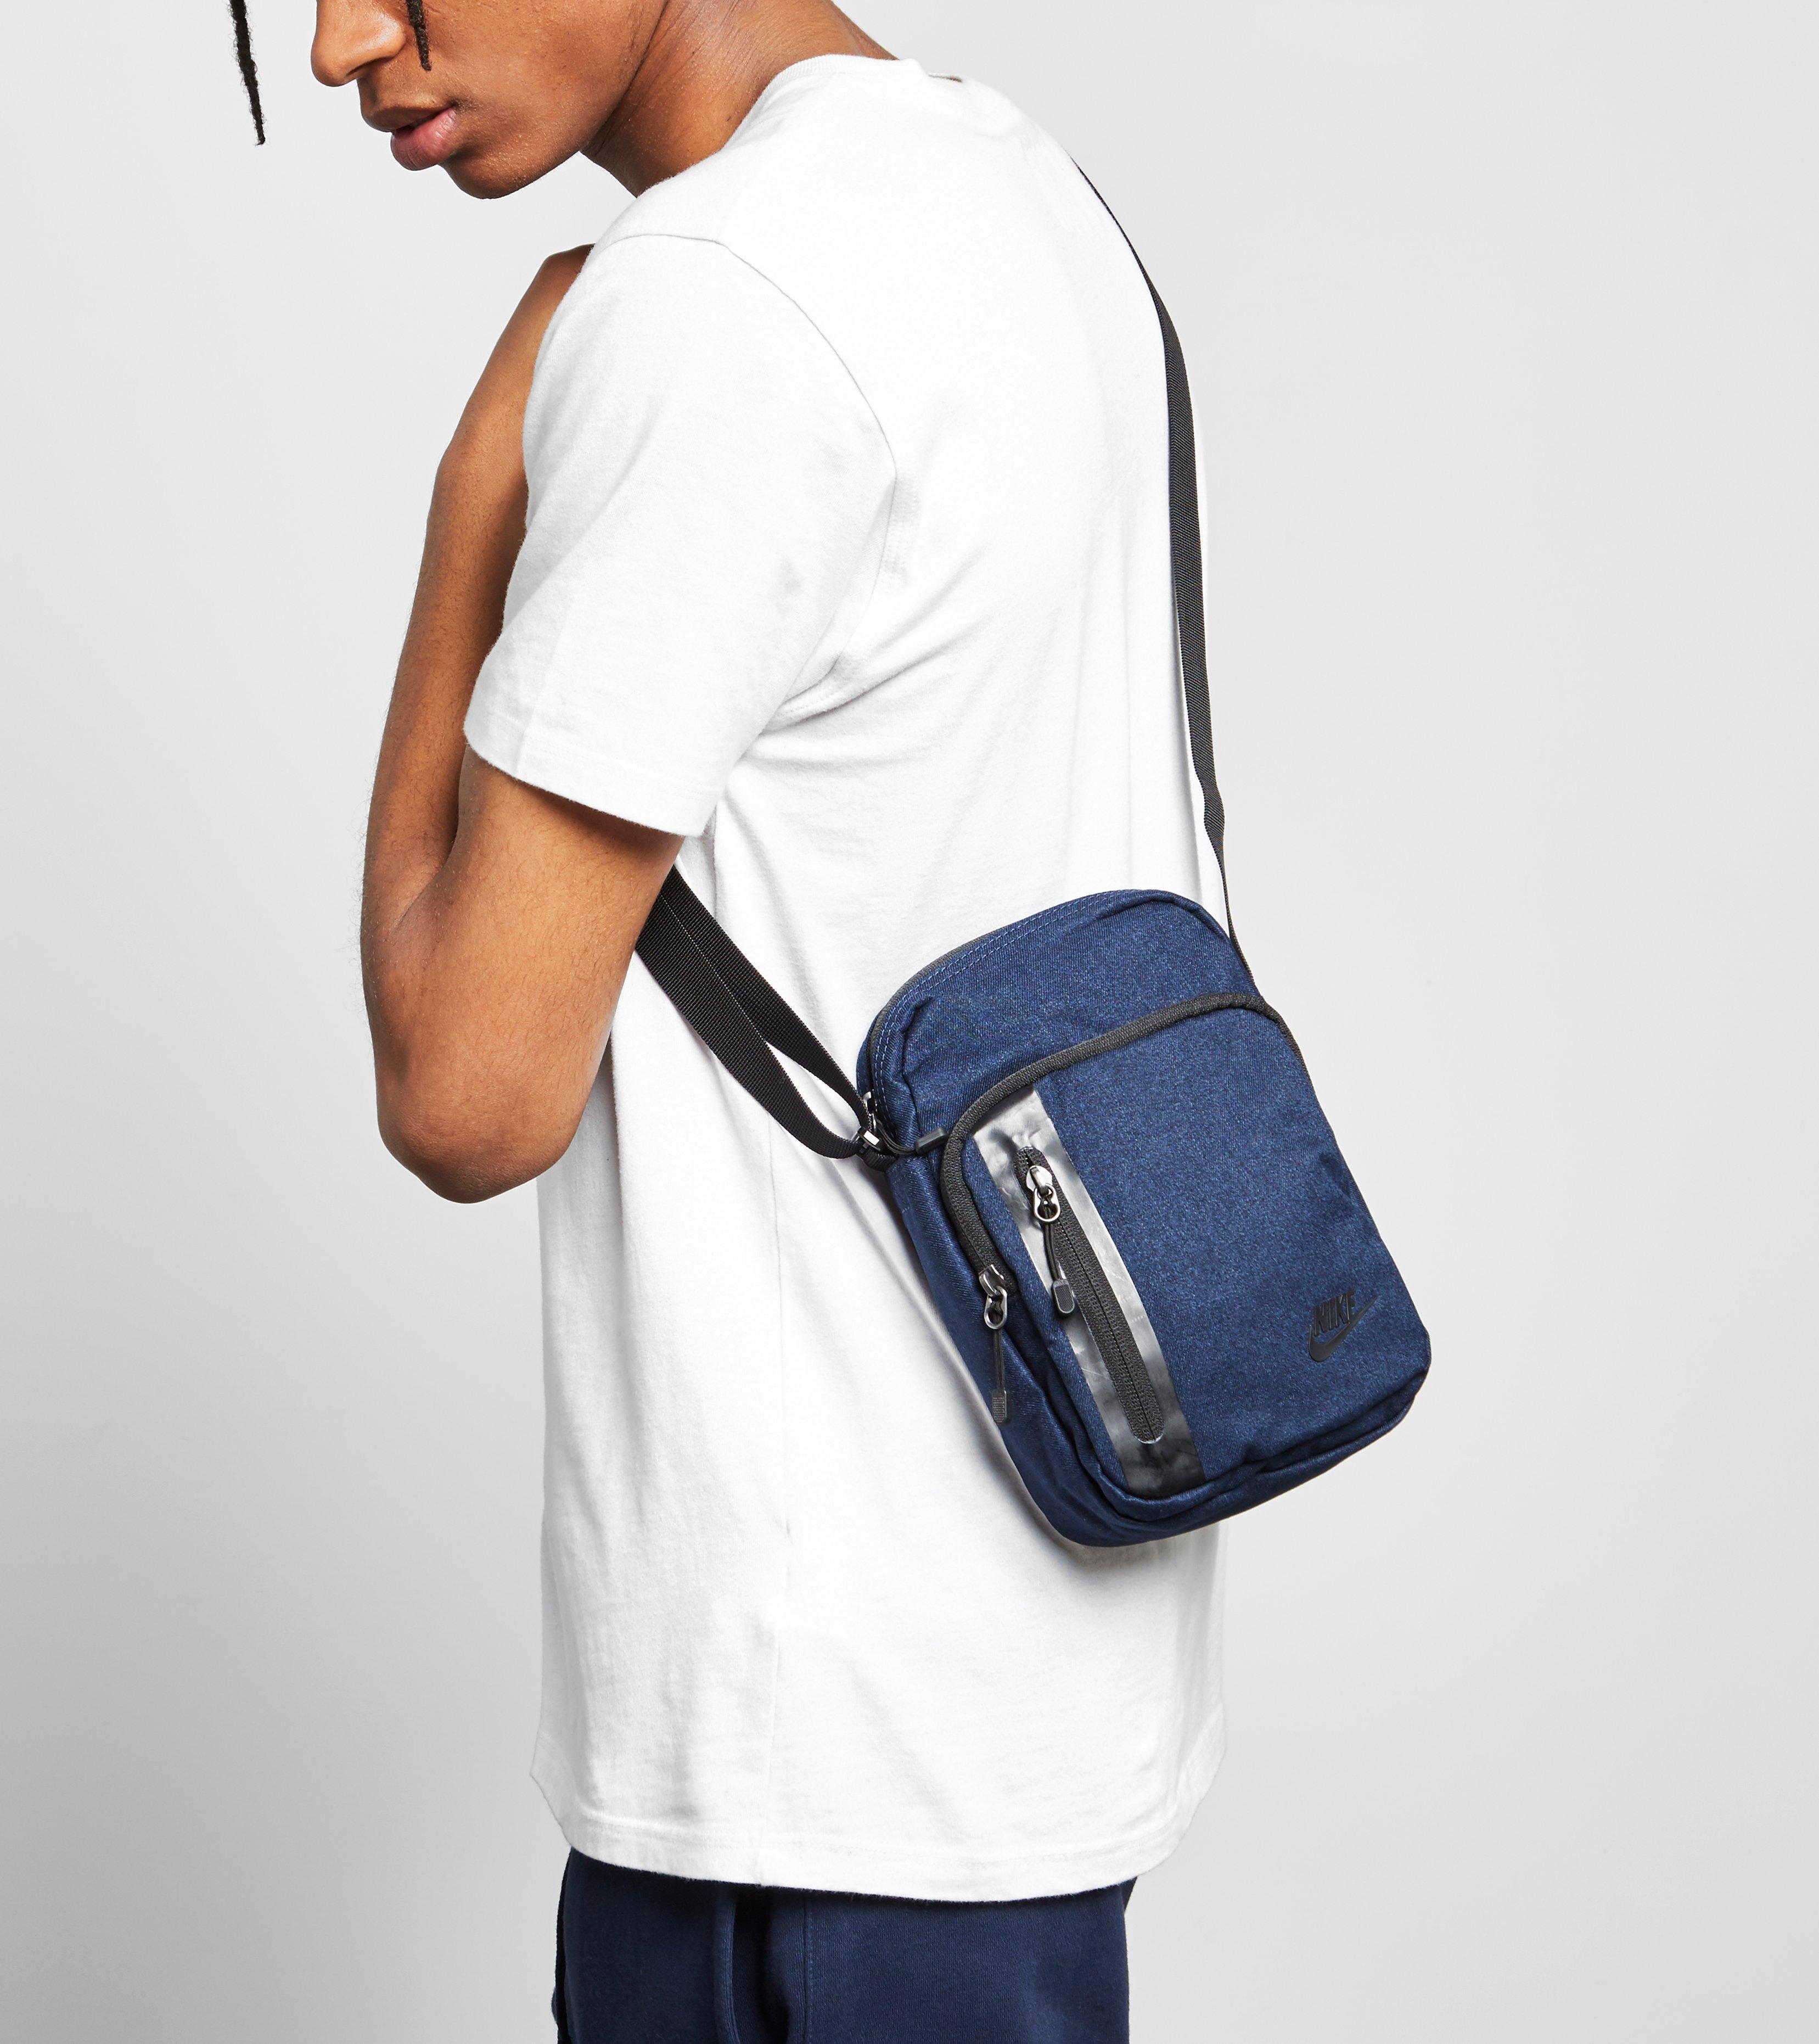 Nike Core Small Items 3.0 Bag in Blue for Men - Lyst